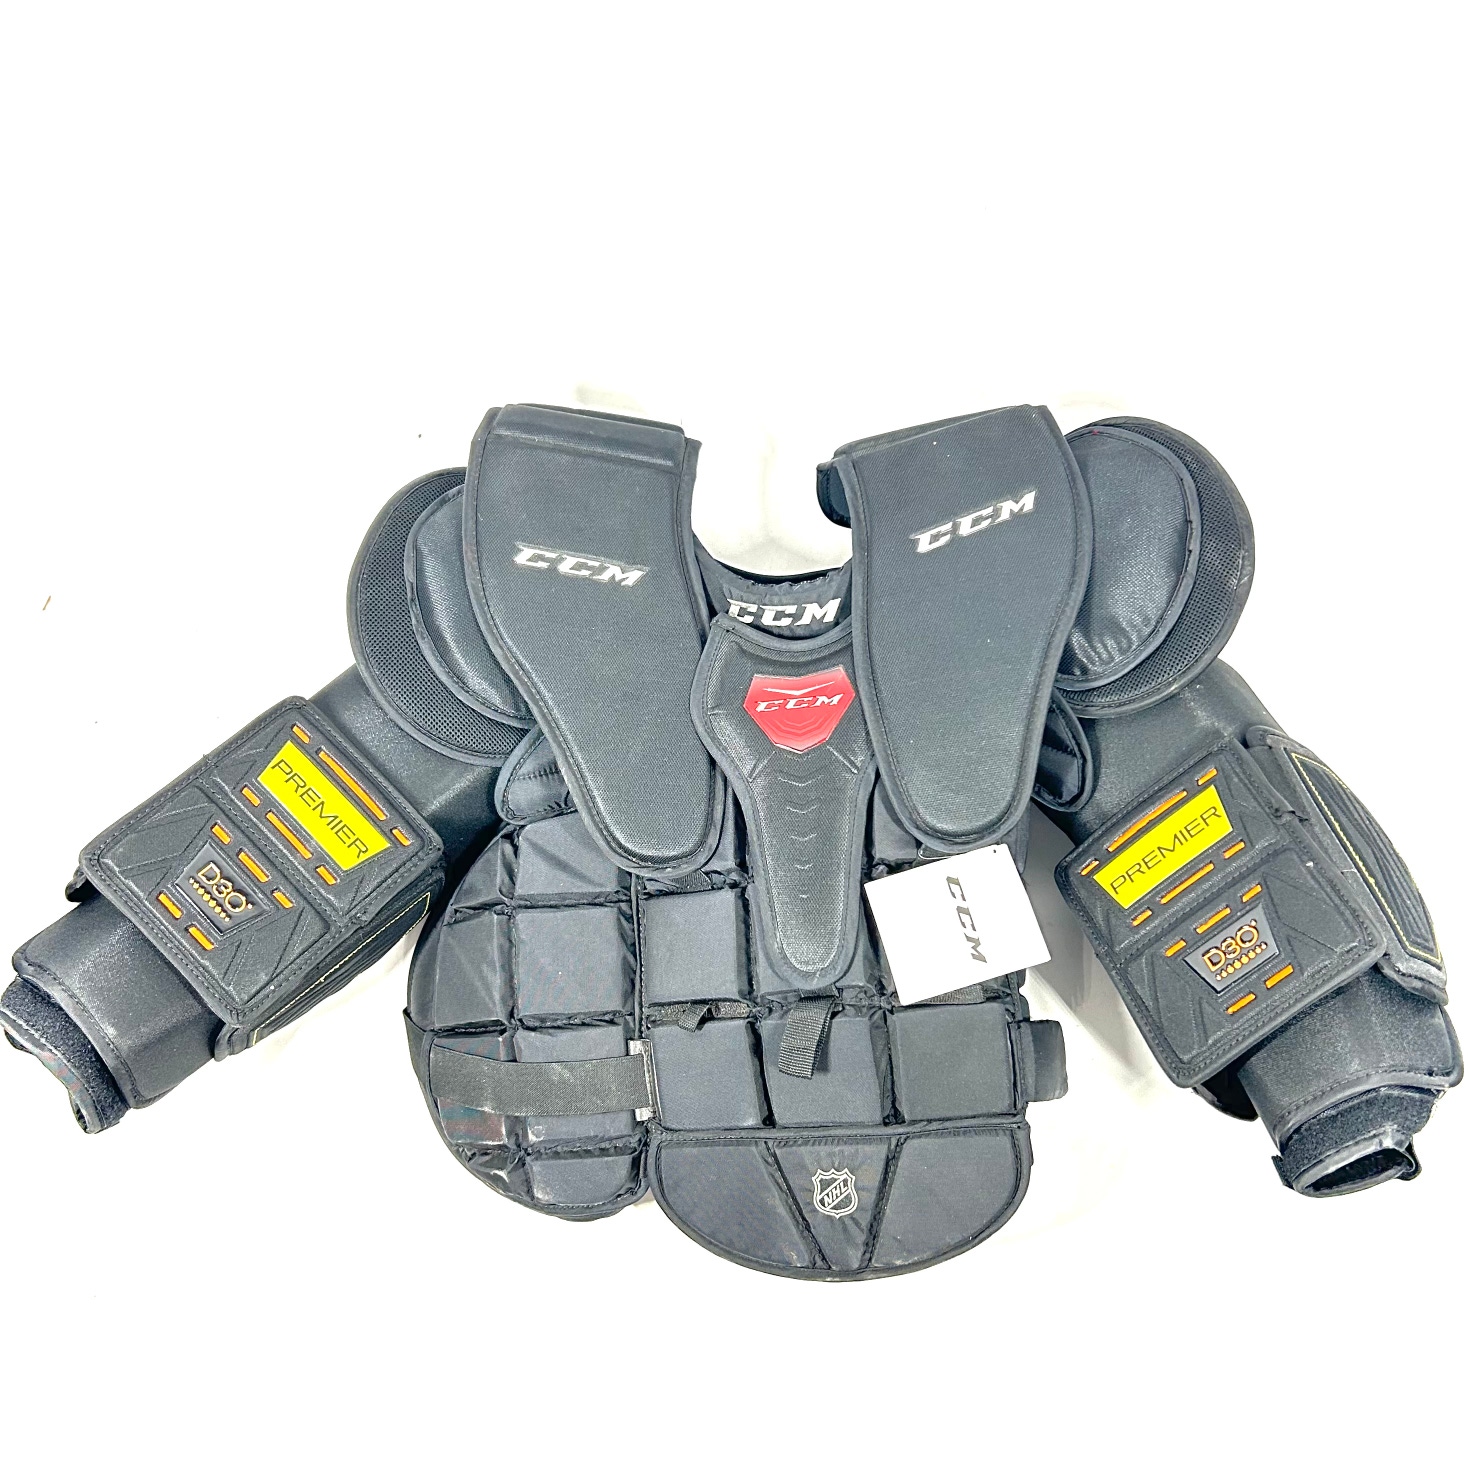 CCM Extreme Flex 5 Pro - Used Pro Stock Goalie Chest Protector